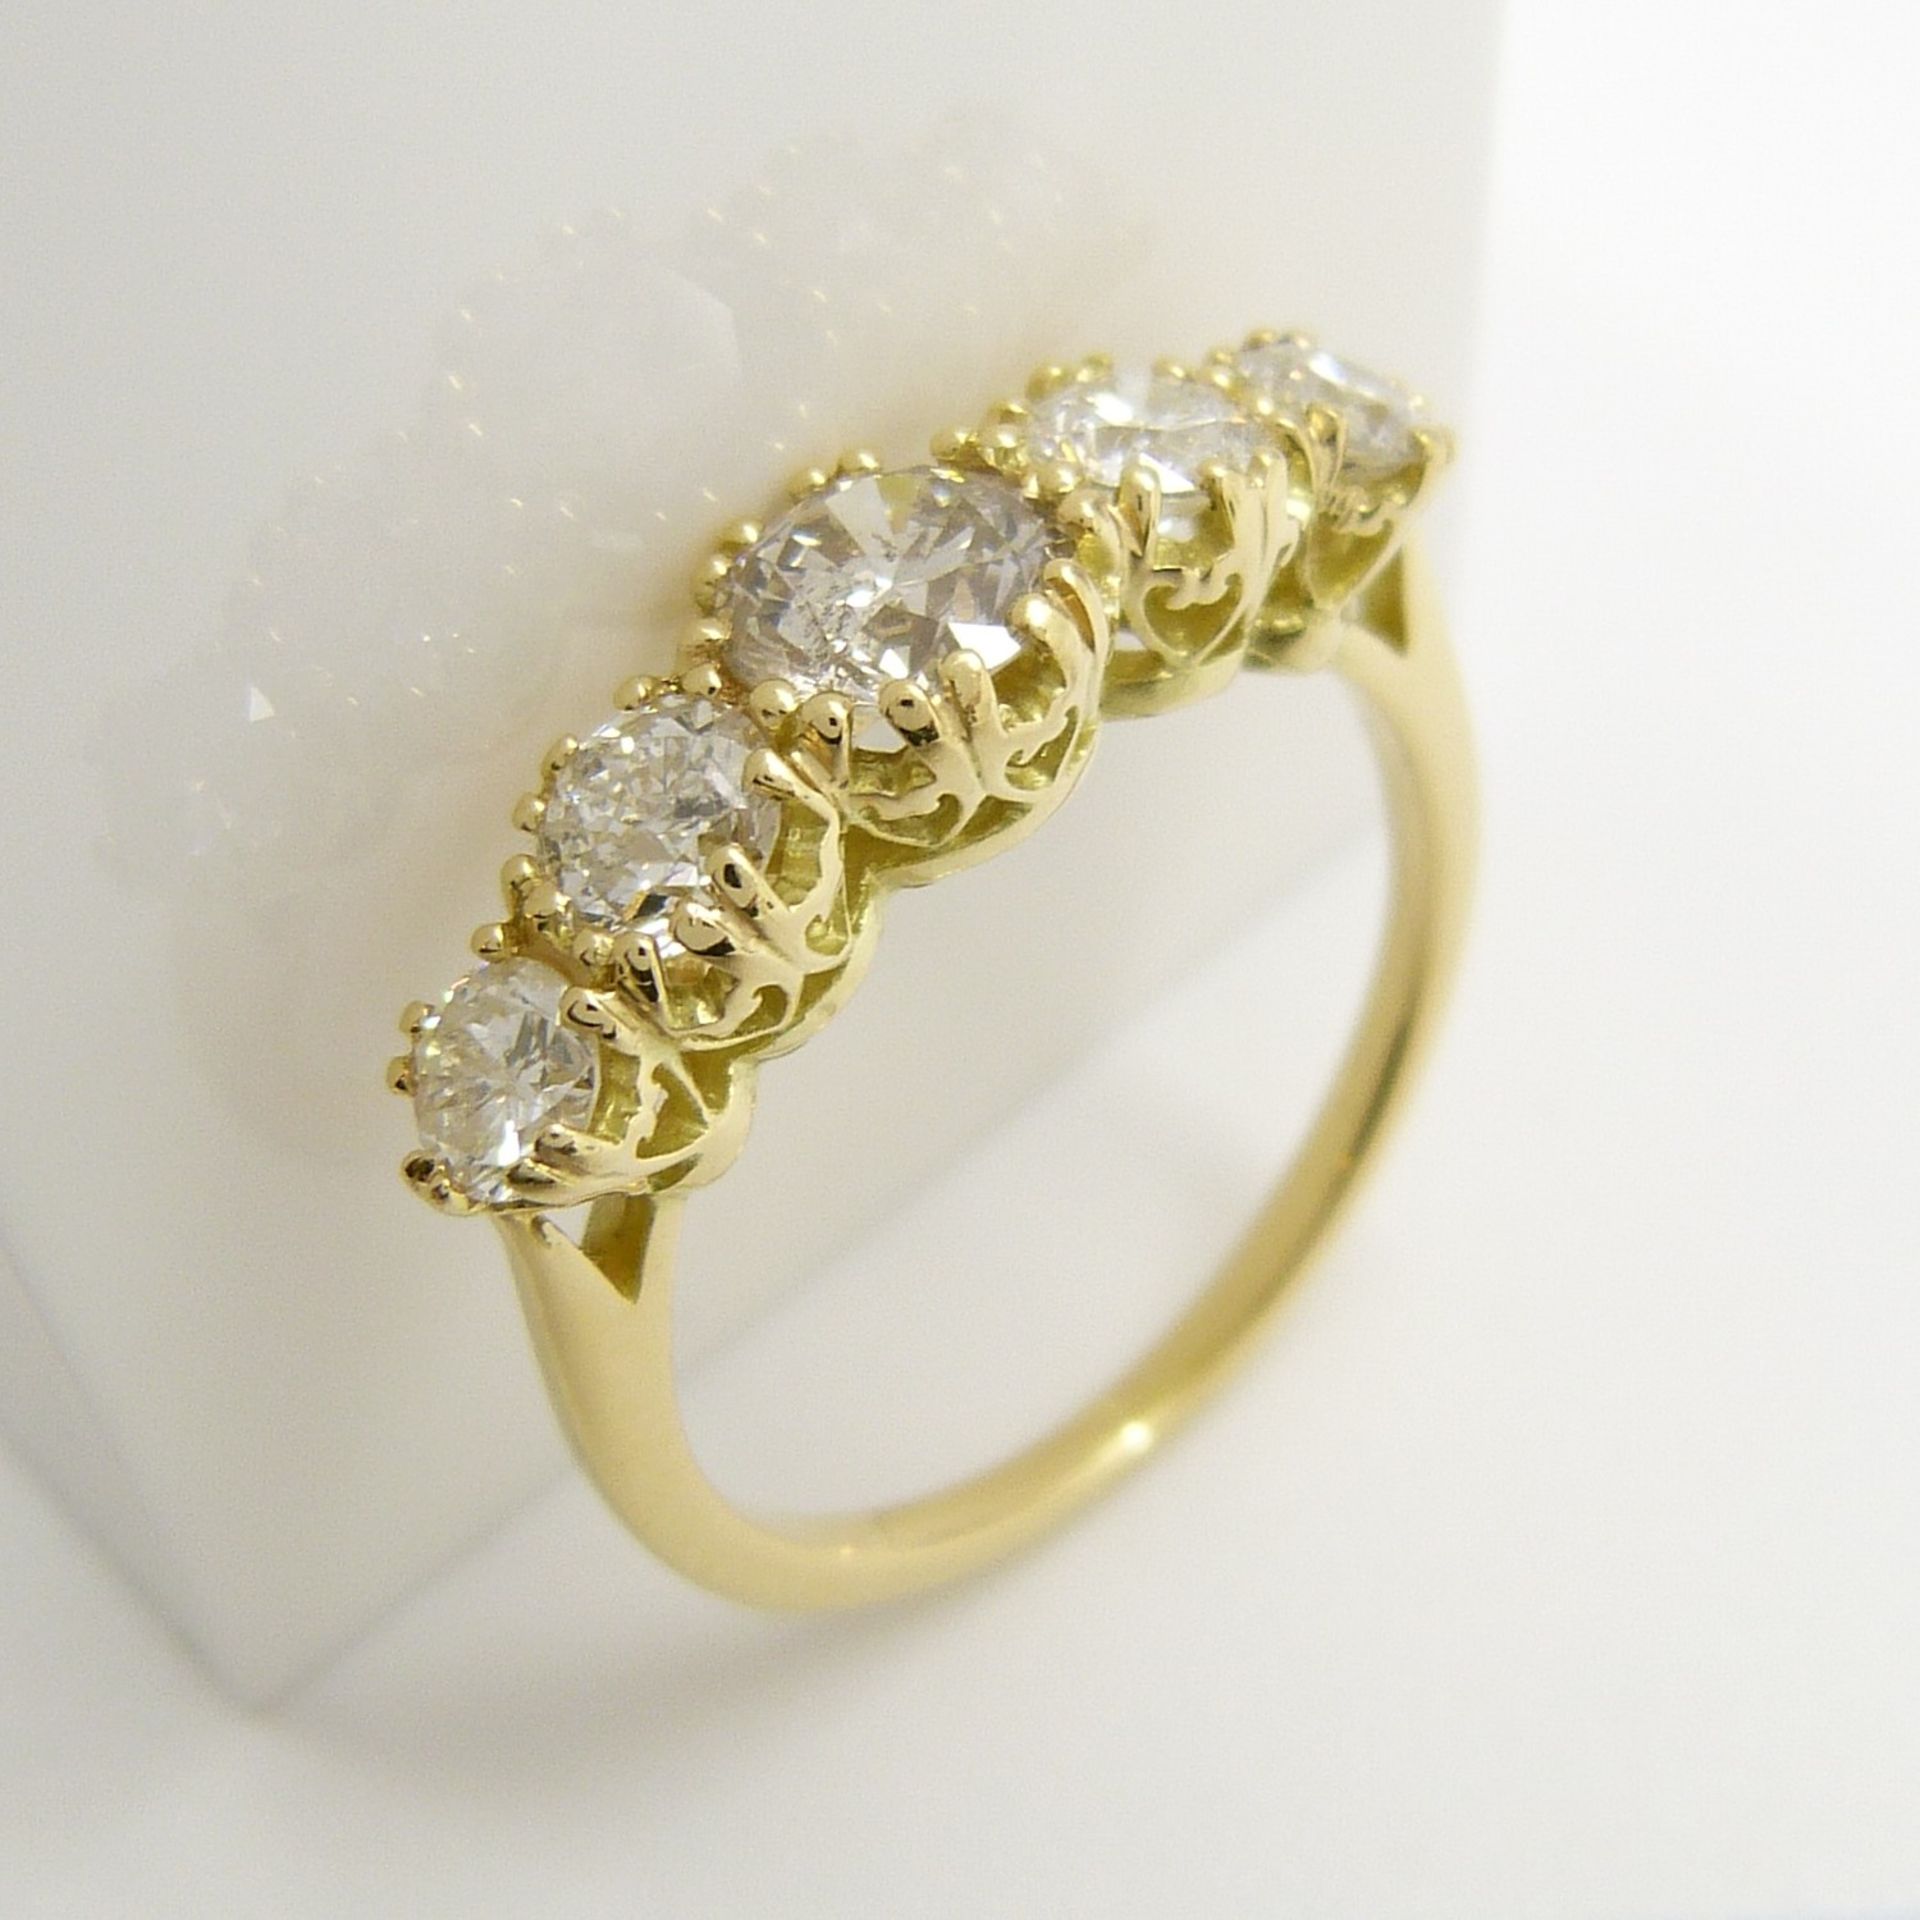 Victorian-style 18ct yellow gold 1.59 carat graduated diamond 5-stone ring with WGI certificate - Image 5 of 8